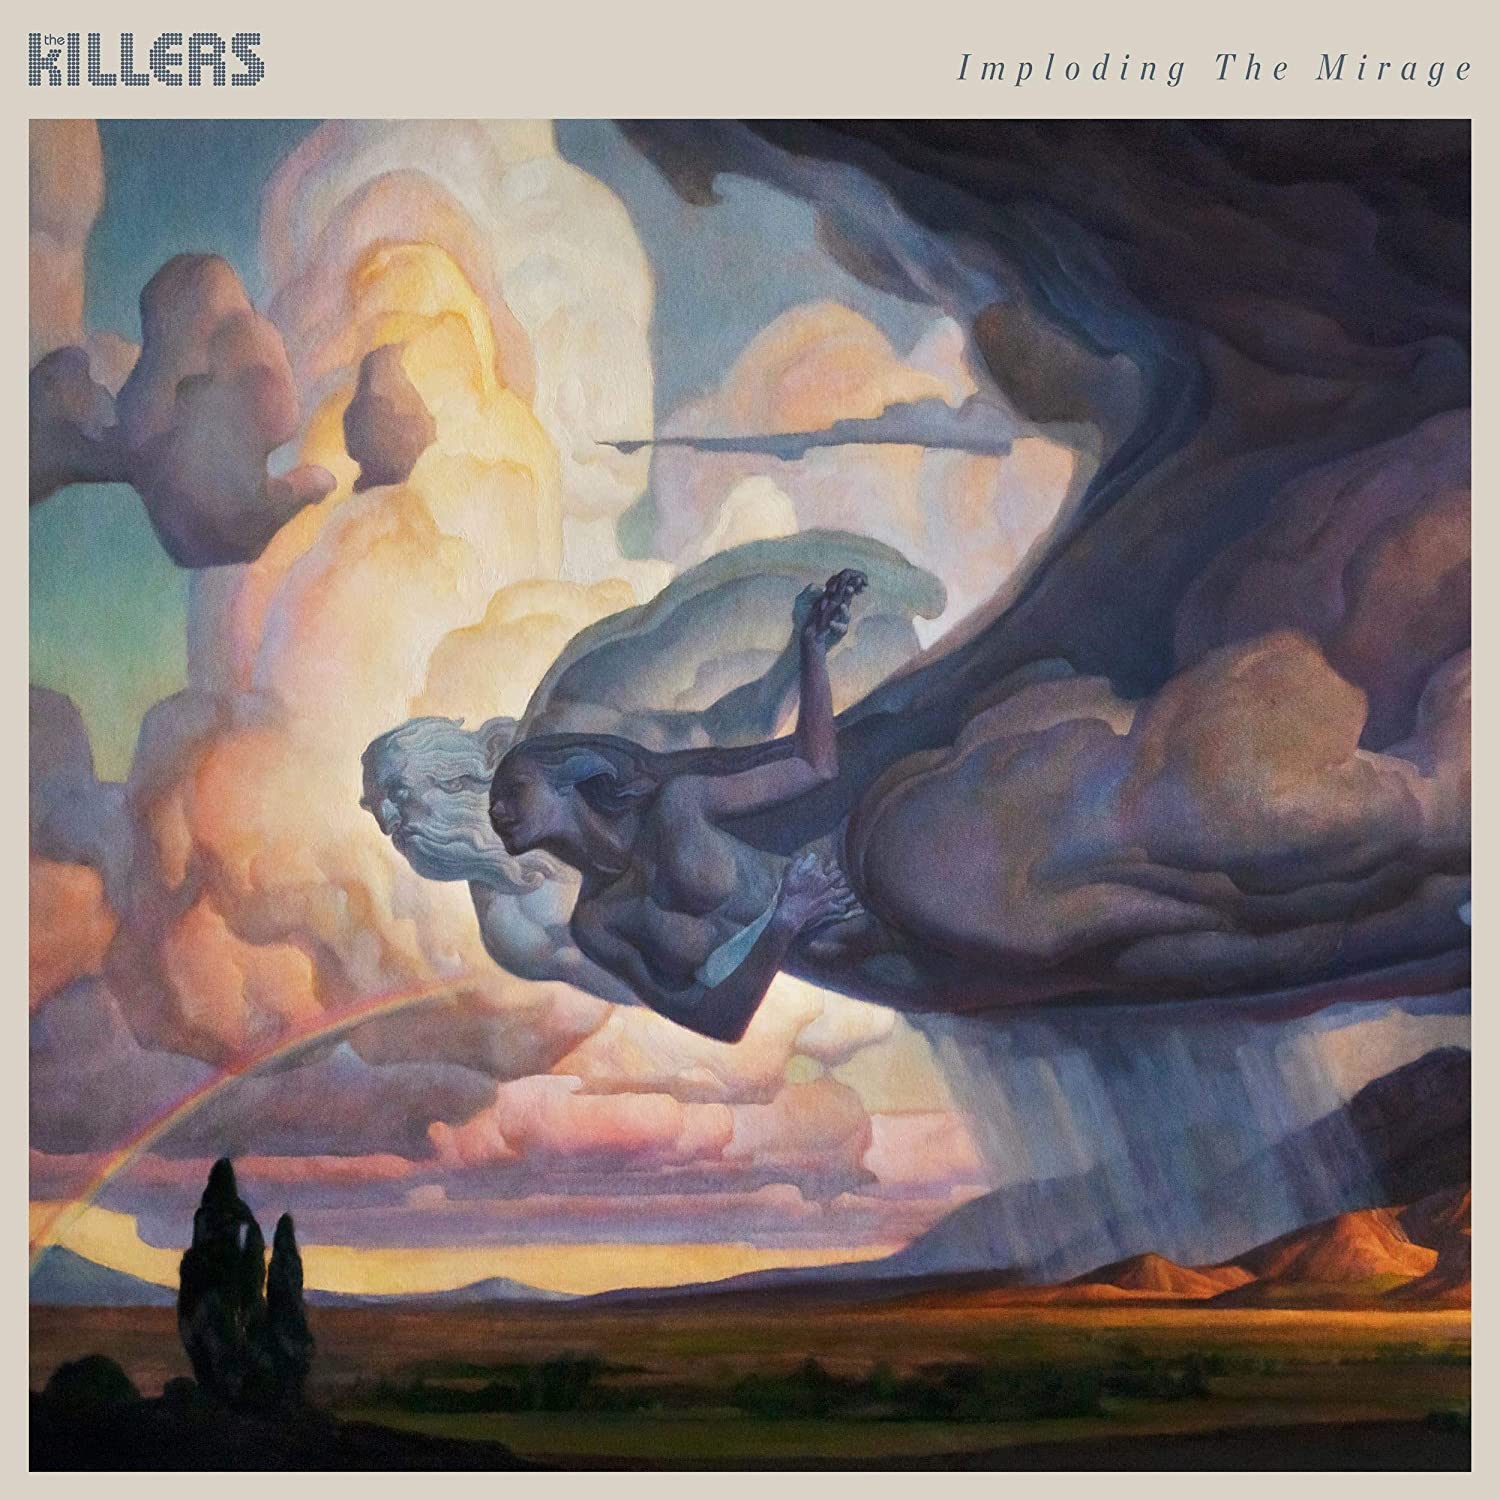 CD The Killers - The Mirage